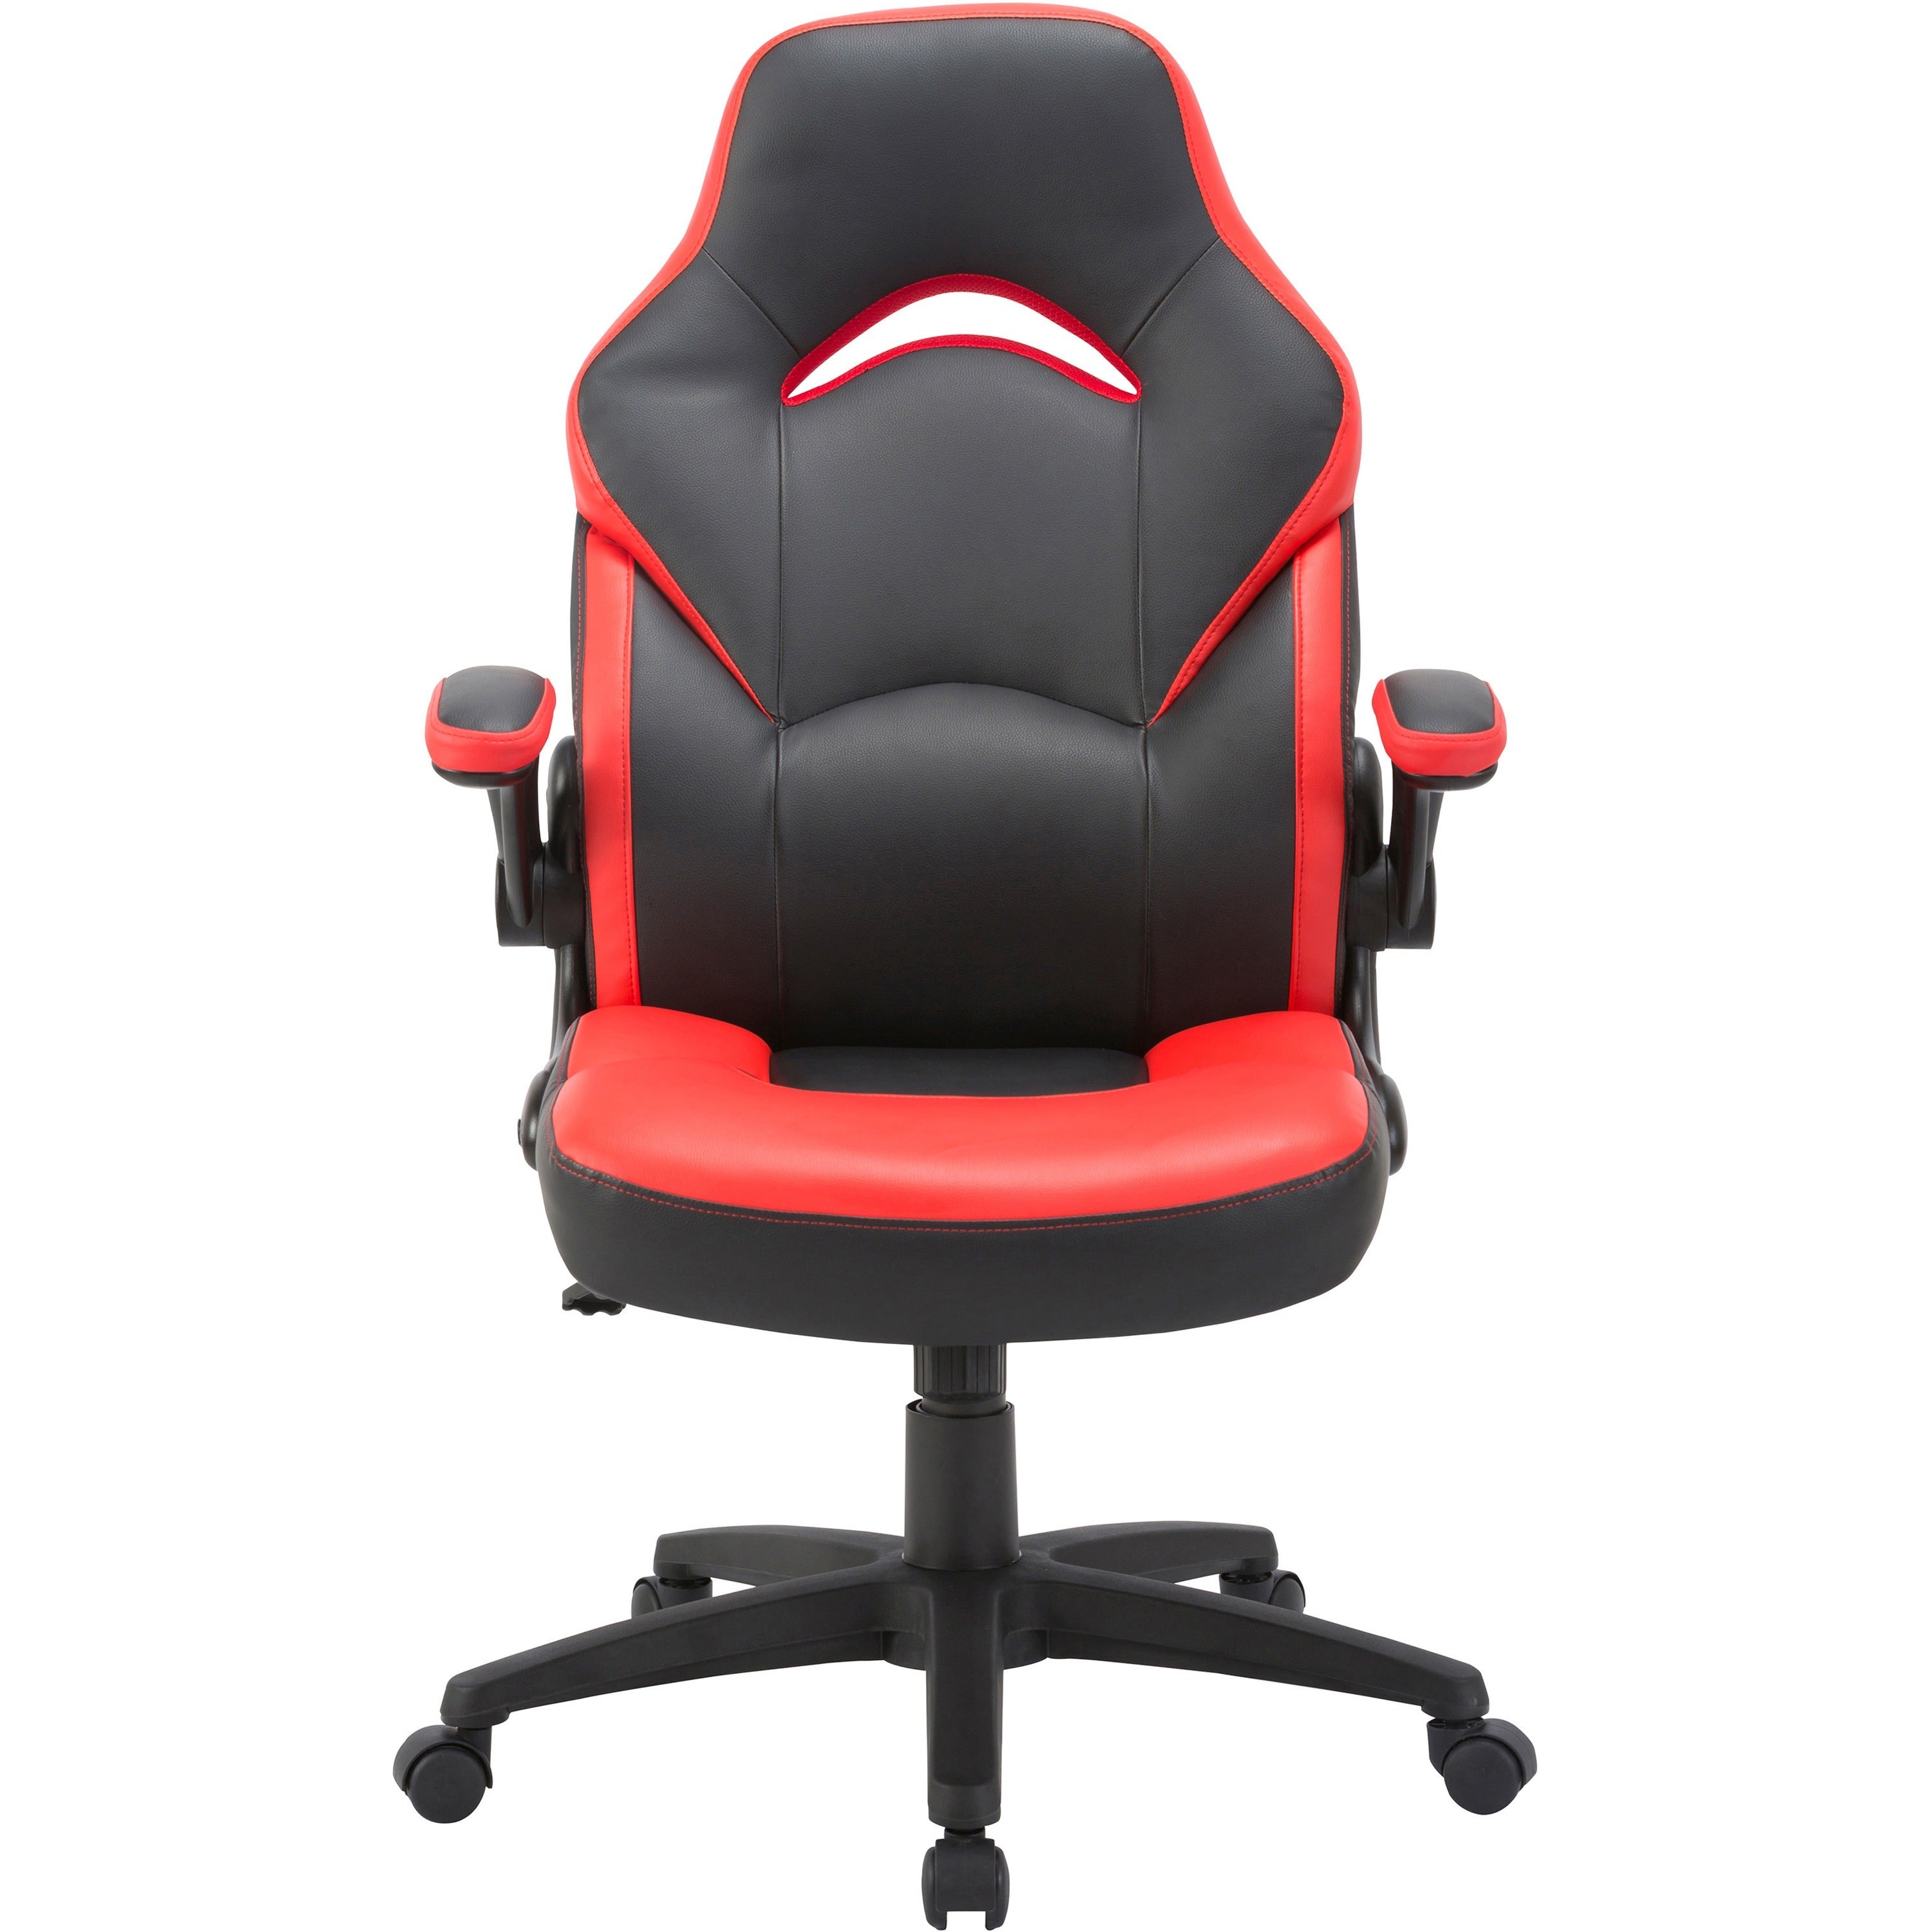 lorell-bucket-seat-high-back-gaming-chair-red-black-seat-red-black-back-5-star-base-28-length-x-205-width-x-475-height_llr84387 - 3